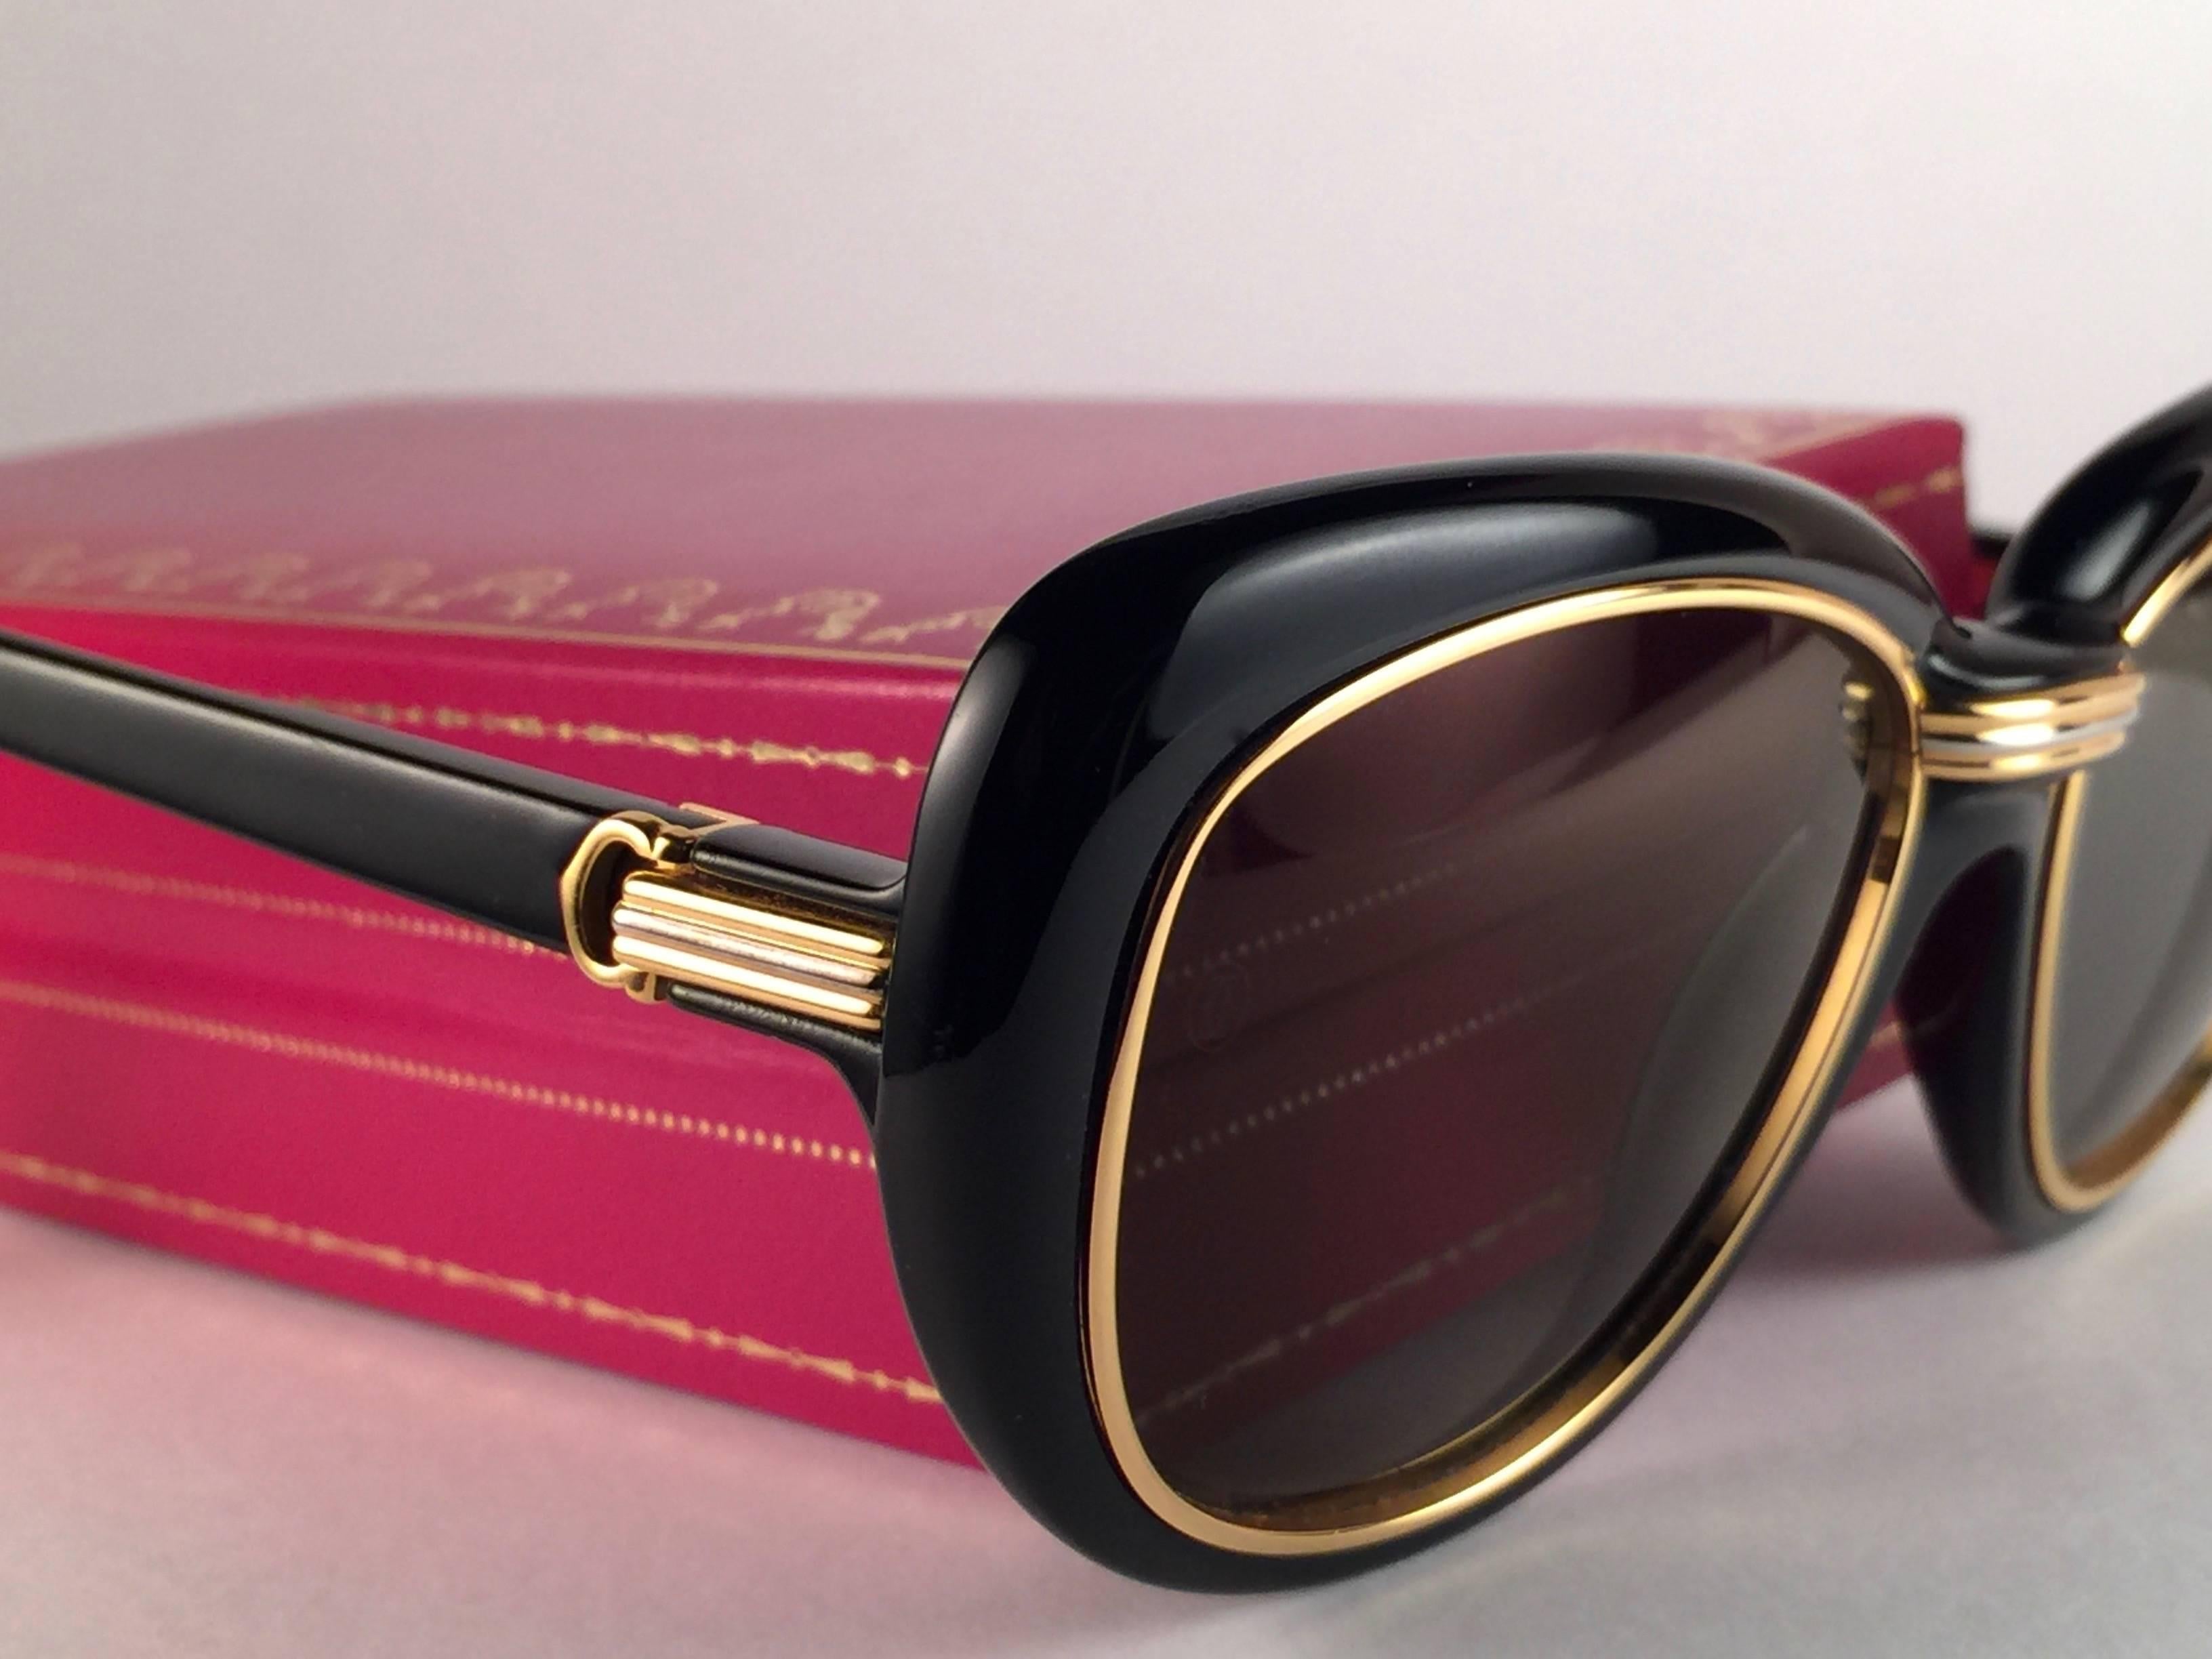 Noir New Vintage Cartier Conquete 51mm Black Gold & Yellow Inserts France Sunglasses